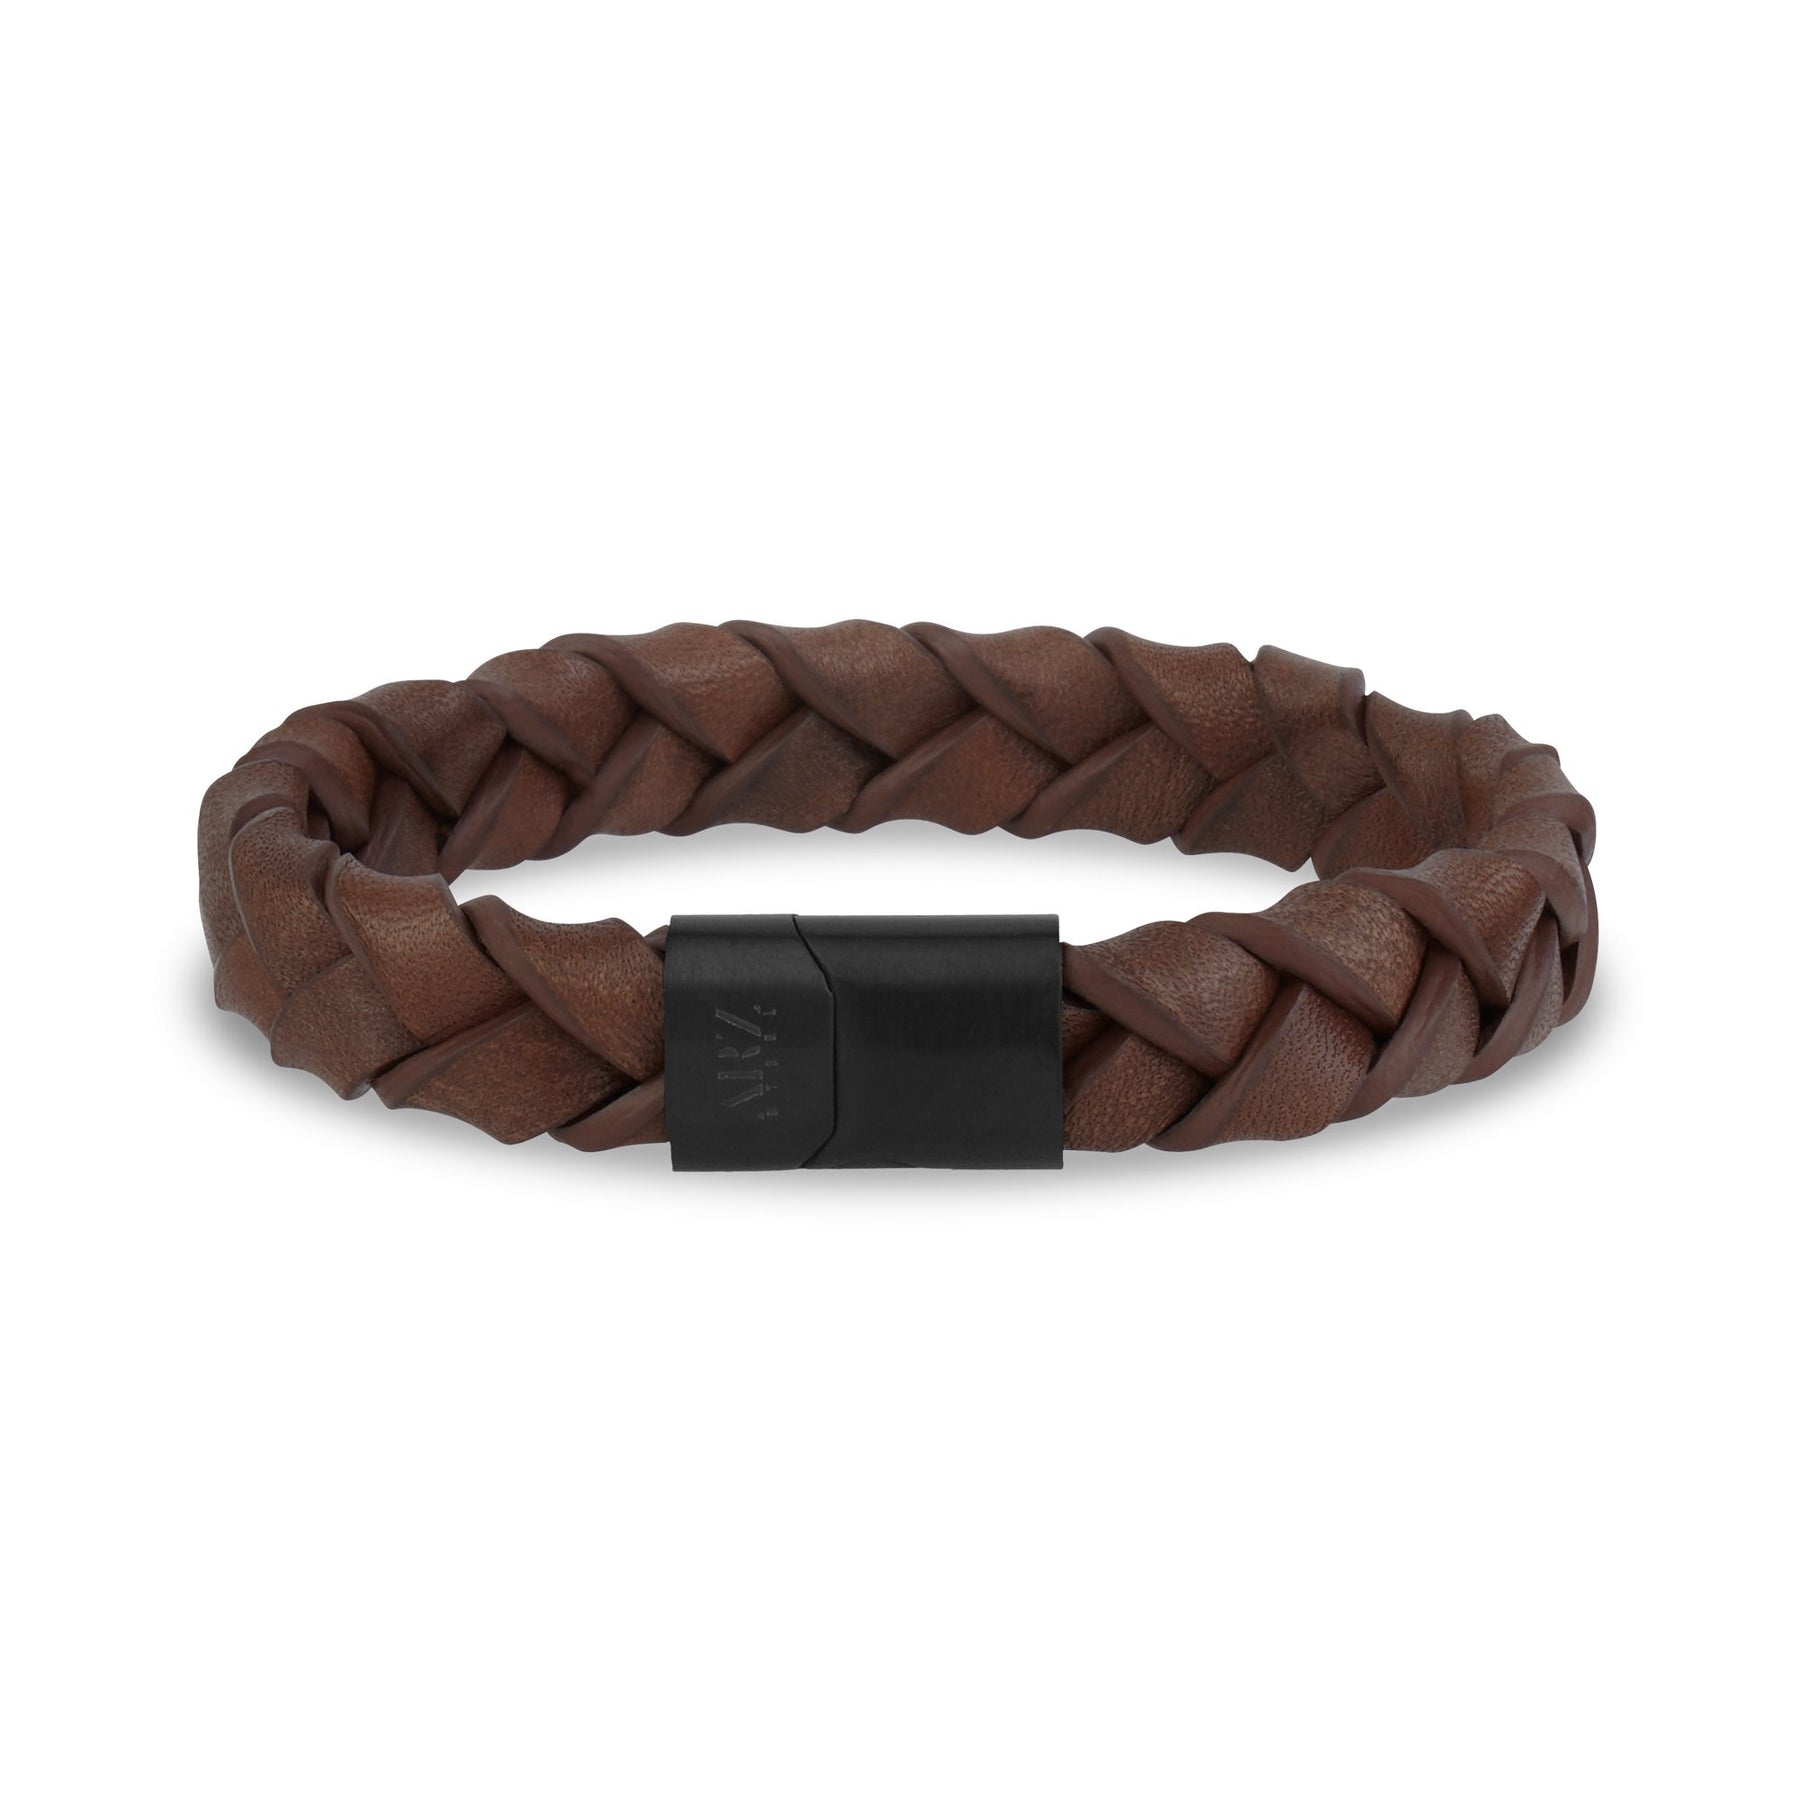 11mm Flat Woven Italian Leather Steel Clasp Engravable Bracelet - Gift for Boyfriend 8.5 Inches / Brown